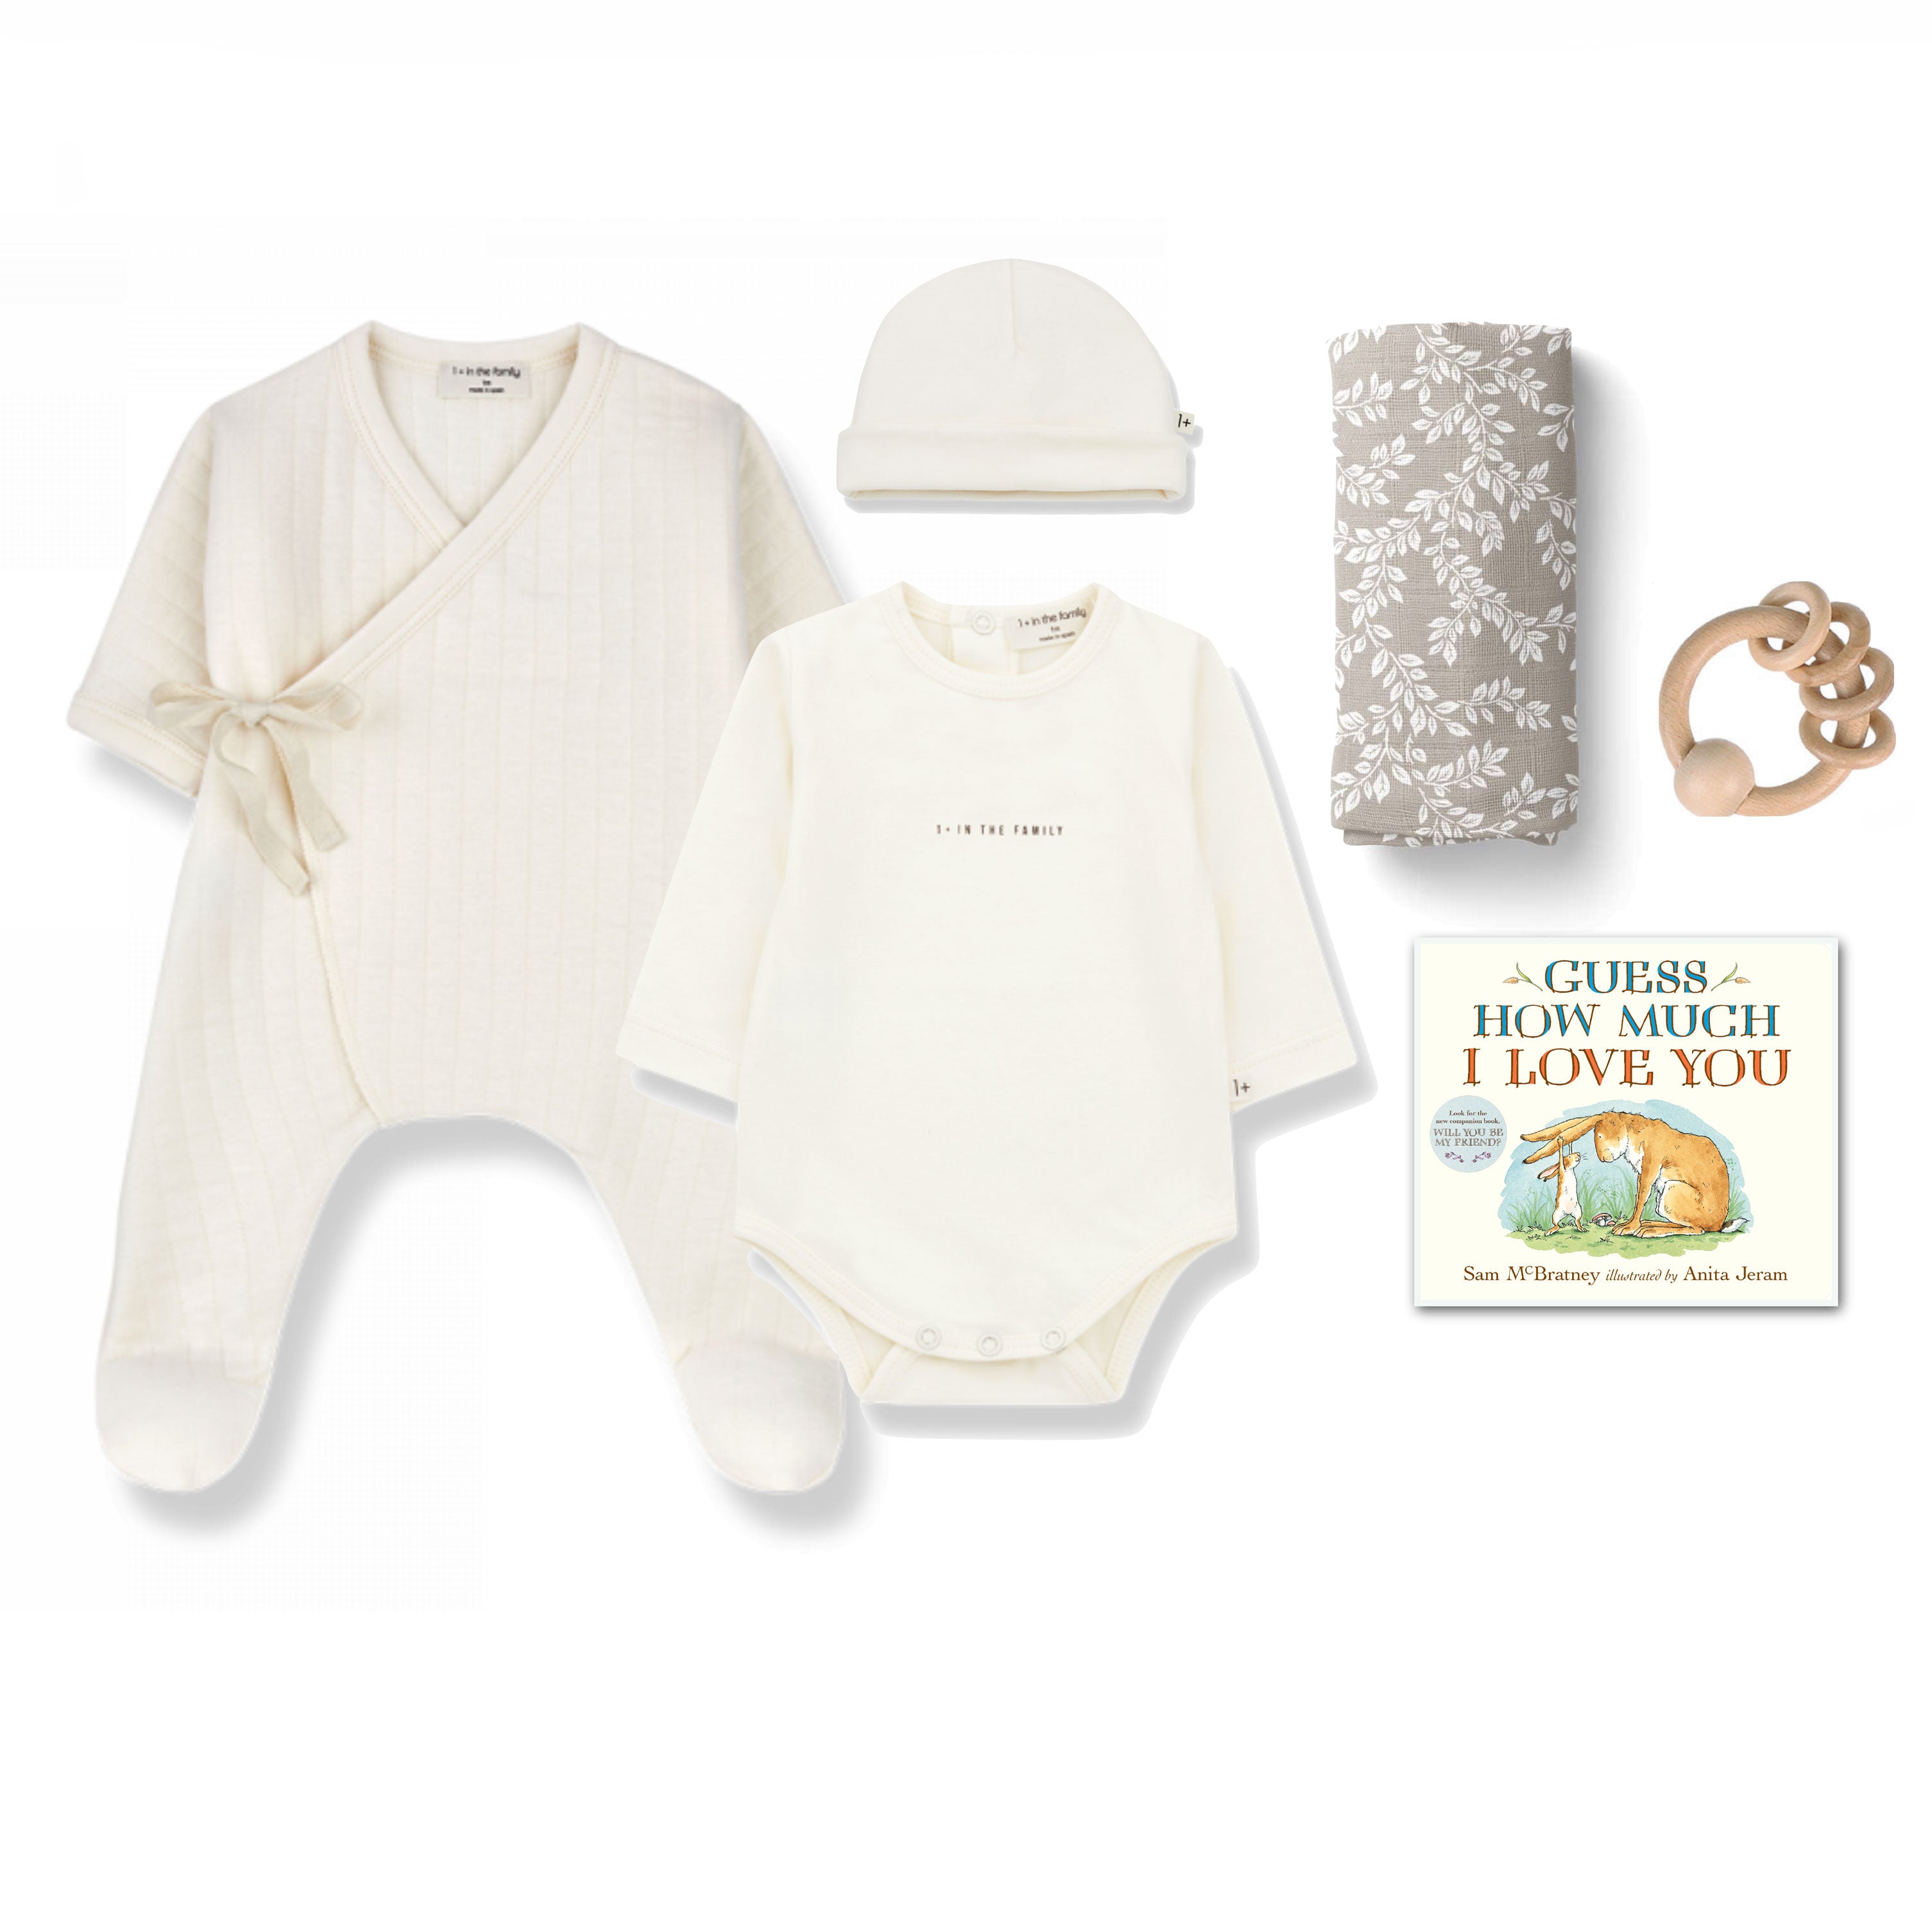 Luxury Baby Gifts featuring 1+ in the Family at Bonjour Baby Baskets